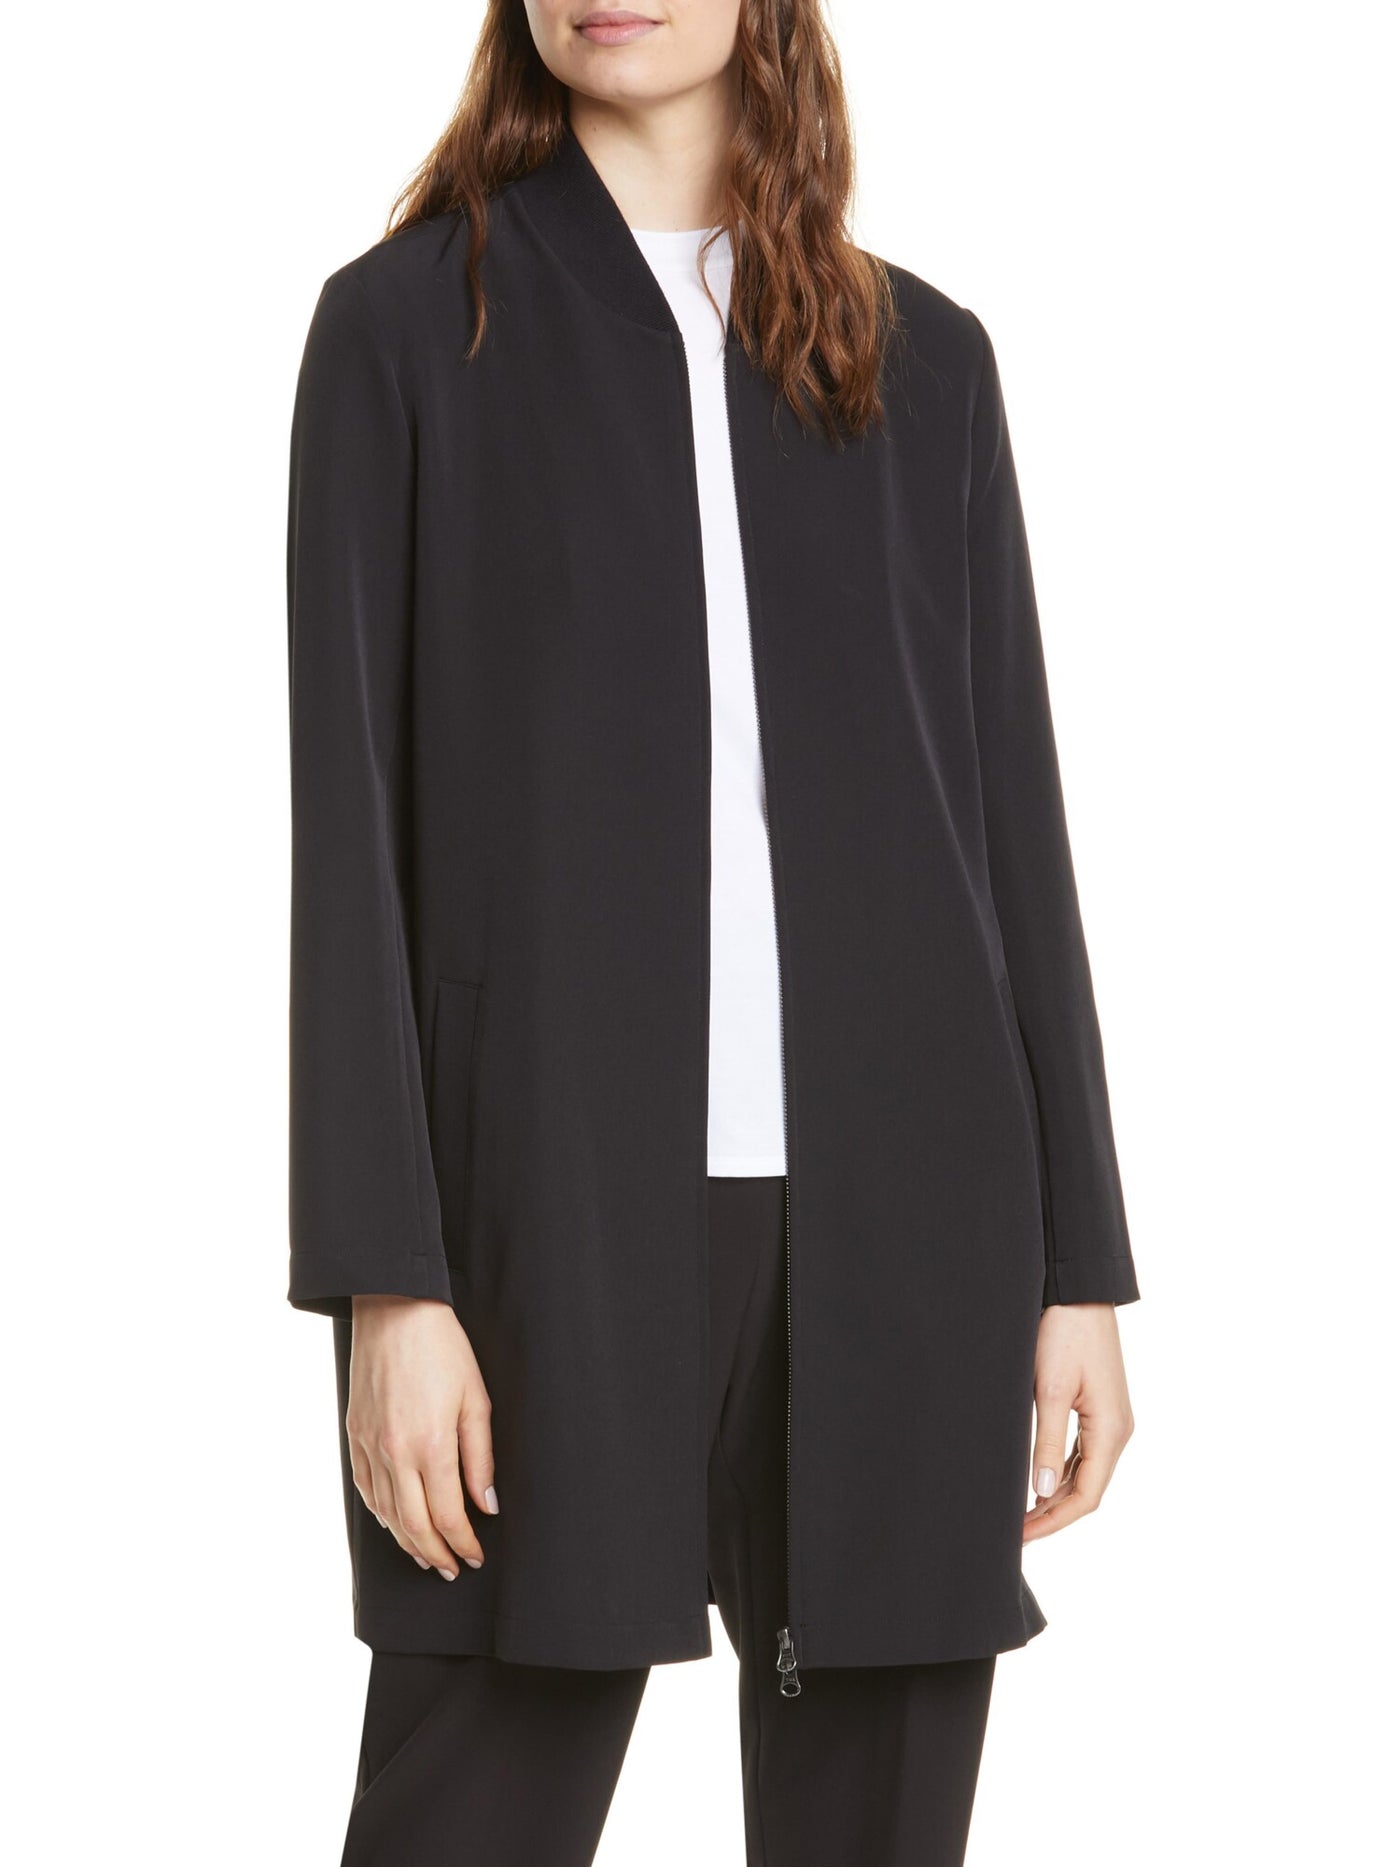 EILEEN FISHER Womens Black Stretch Pocketed Long Two-way Front-zip Closure Long Sleeve Stand Collar Wear To Work Jacket M